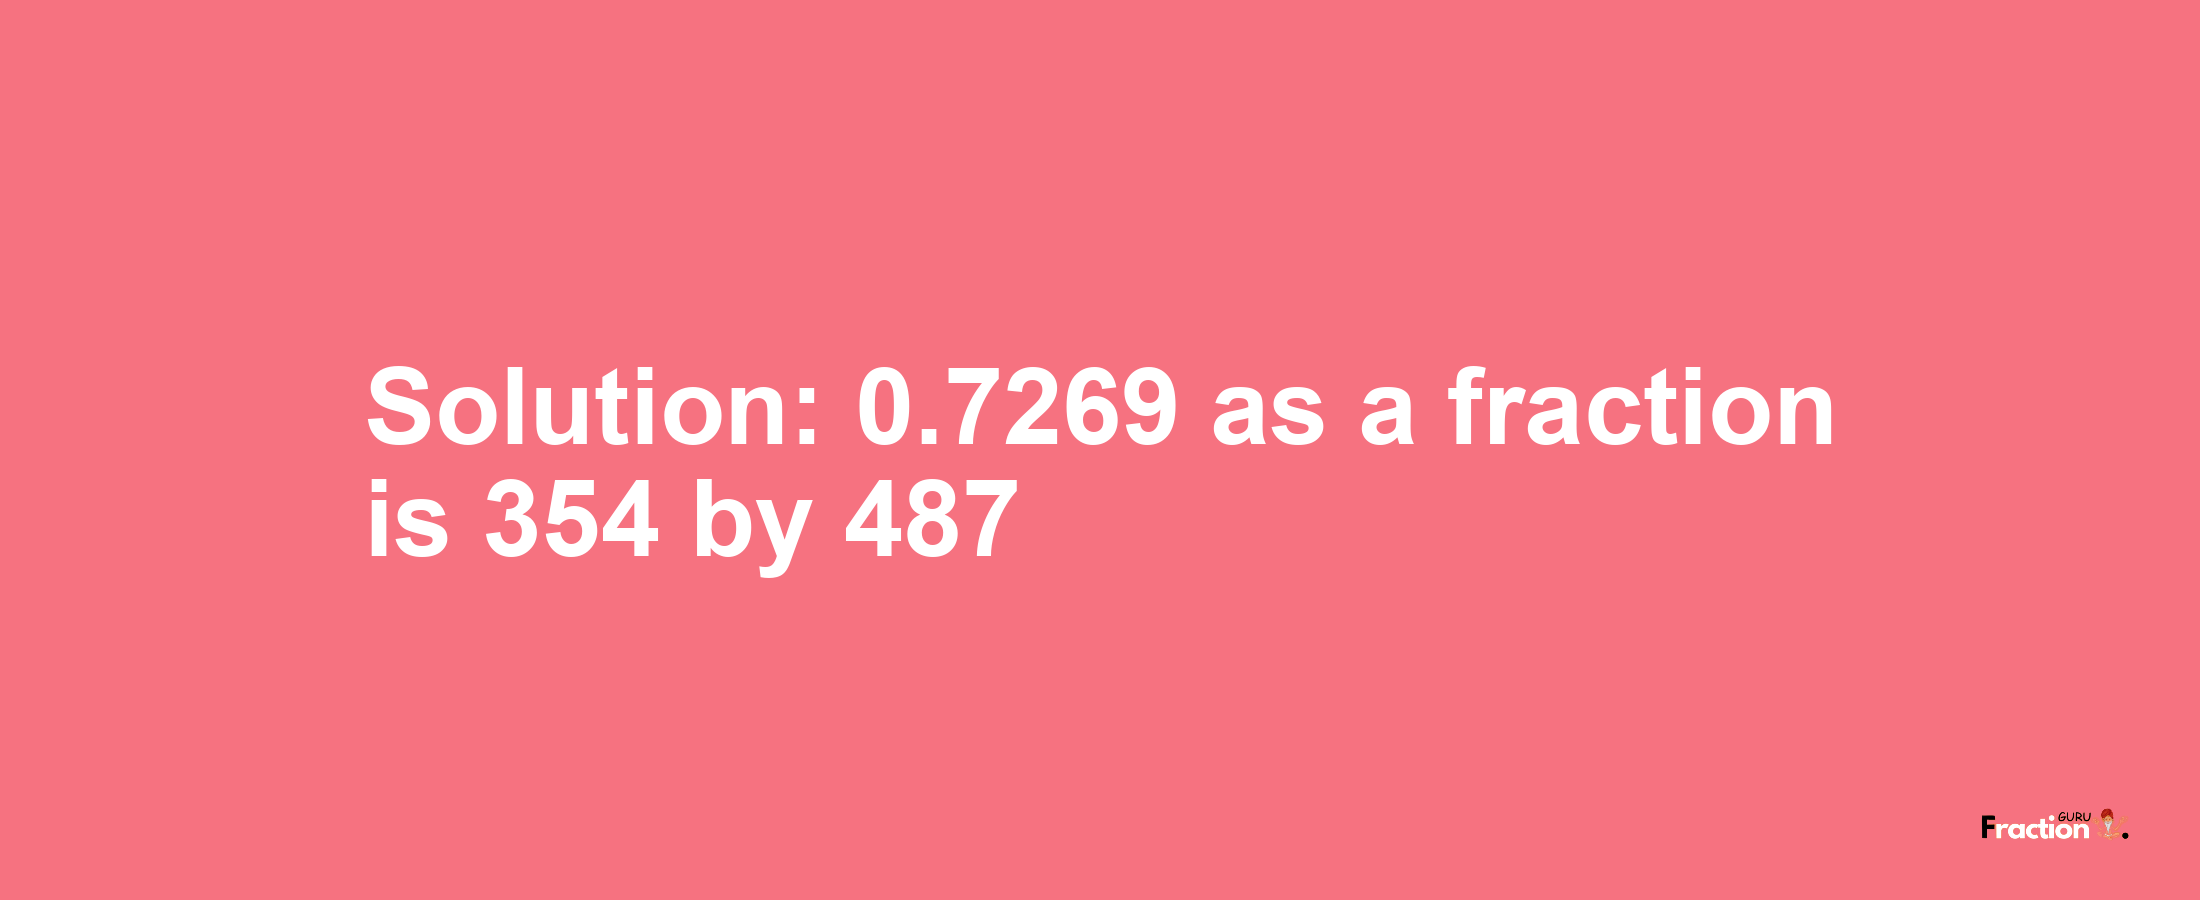 Solution:0.7269 as a fraction is 354/487